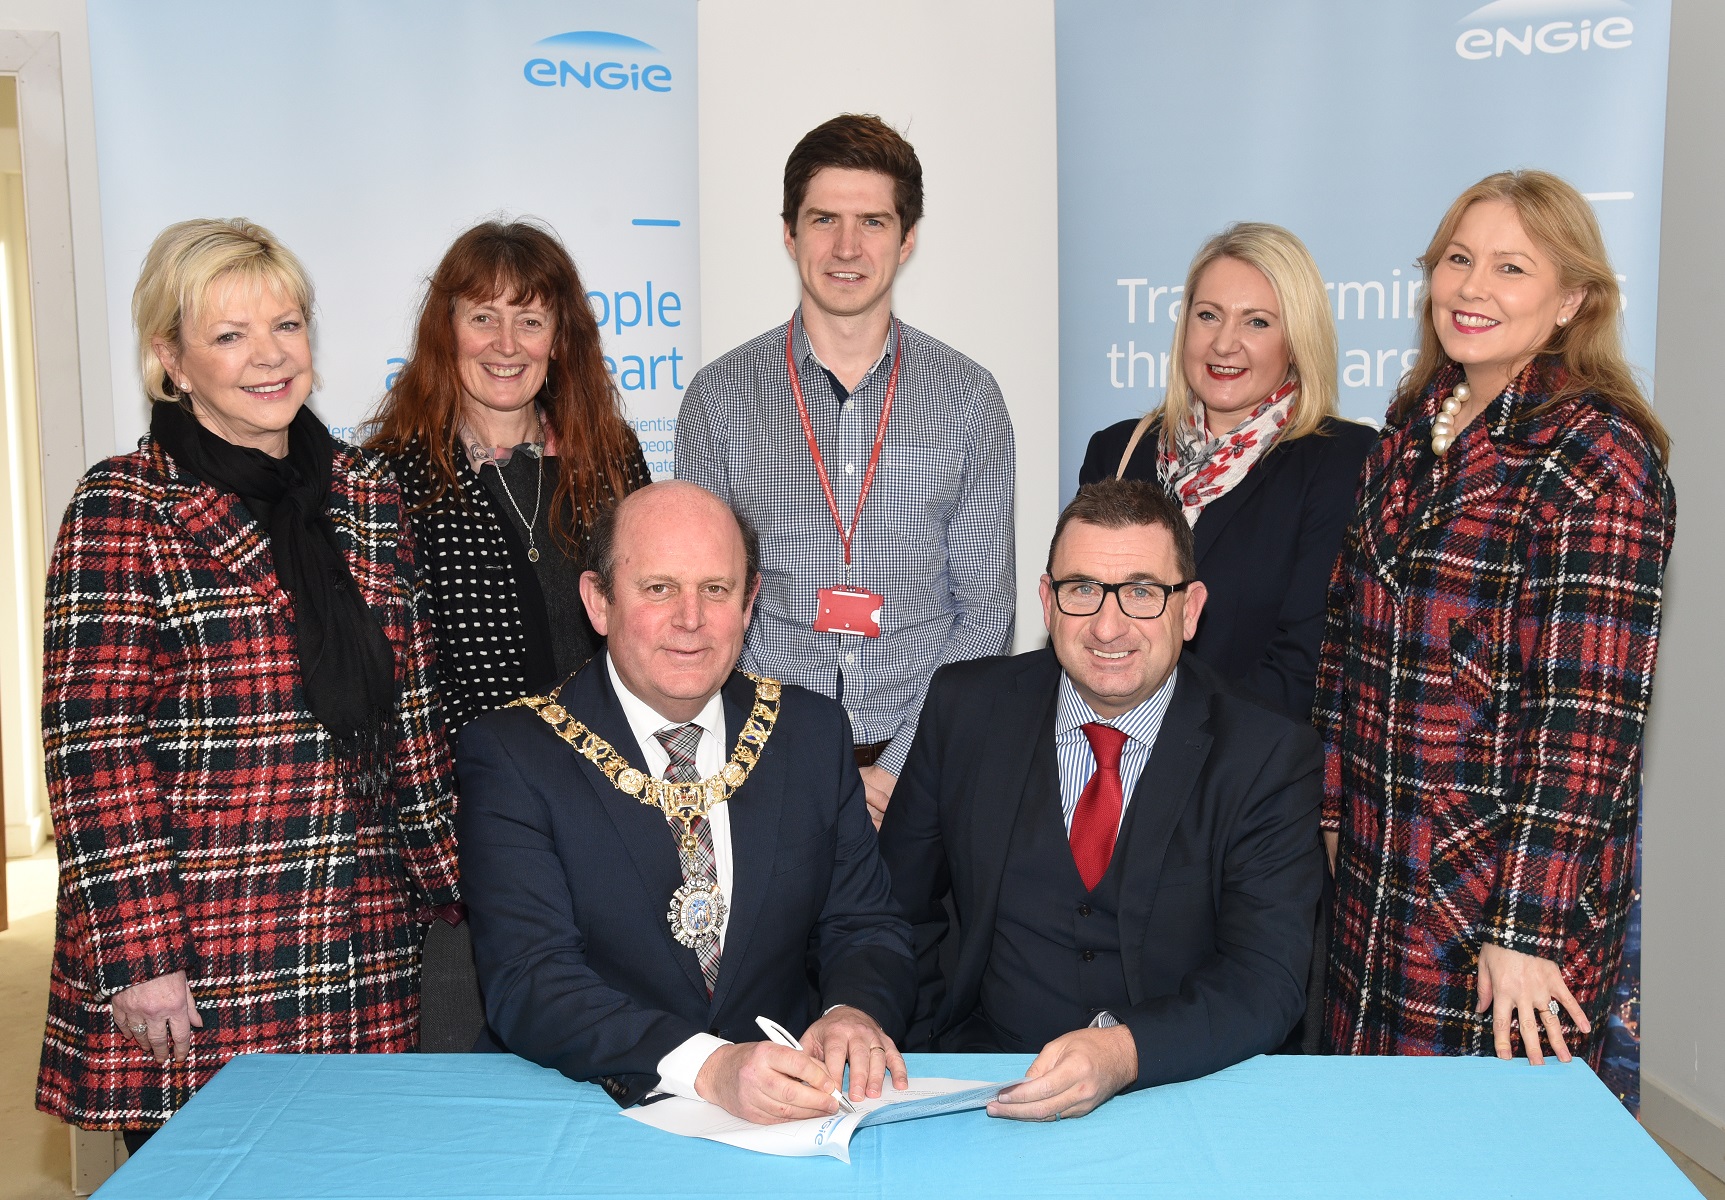 ENGIE launches £50k community fund in south west Edinburgh